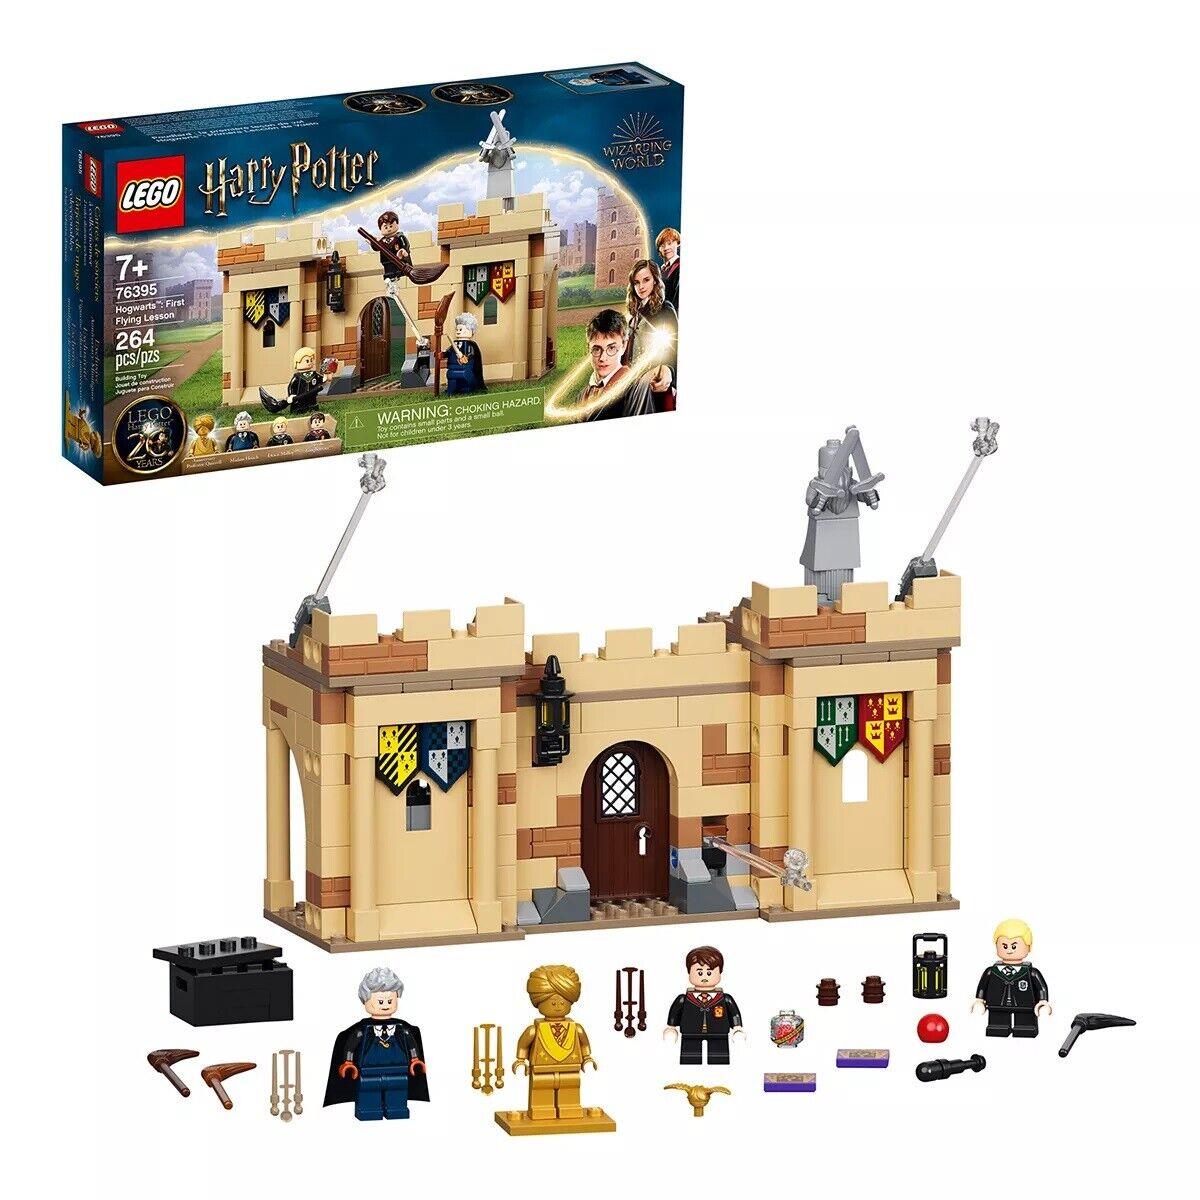 Lego Harry Potter Hogwarts First Flying Lesson 76395 Building Toy 264 Pieces